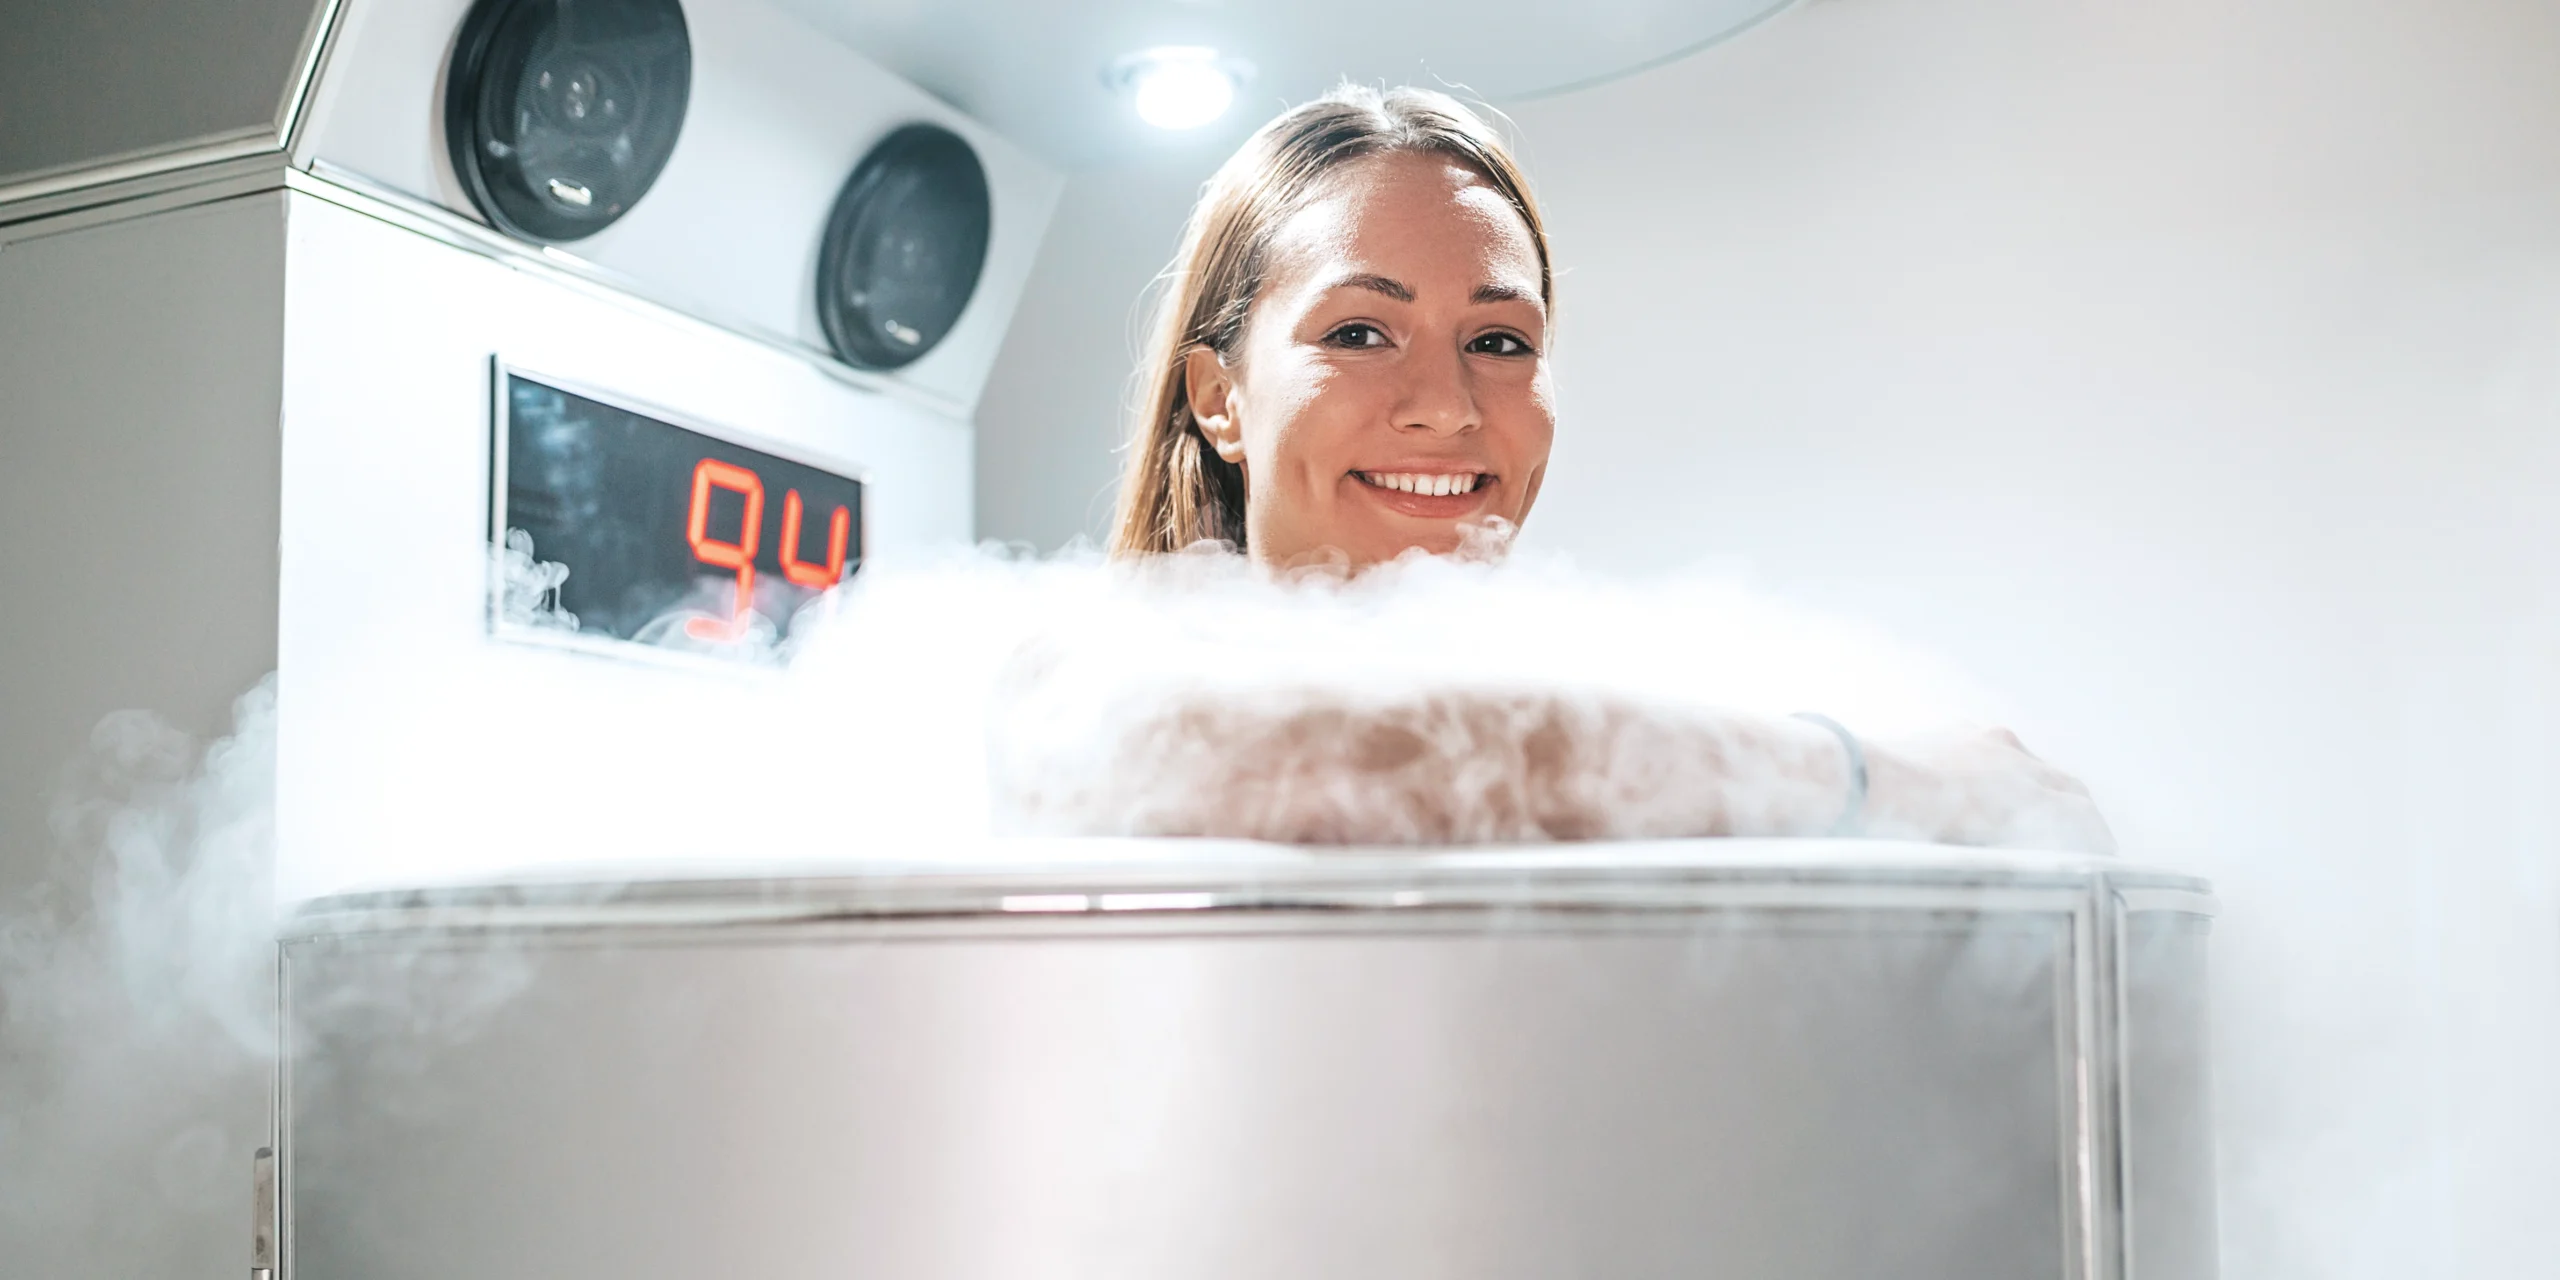 A young blonde woman is shown in a steel cryotherapy chamber. Only her neck and head are visible, and liquid nitrogen swirls around her. She looks towards the camera and smiles.